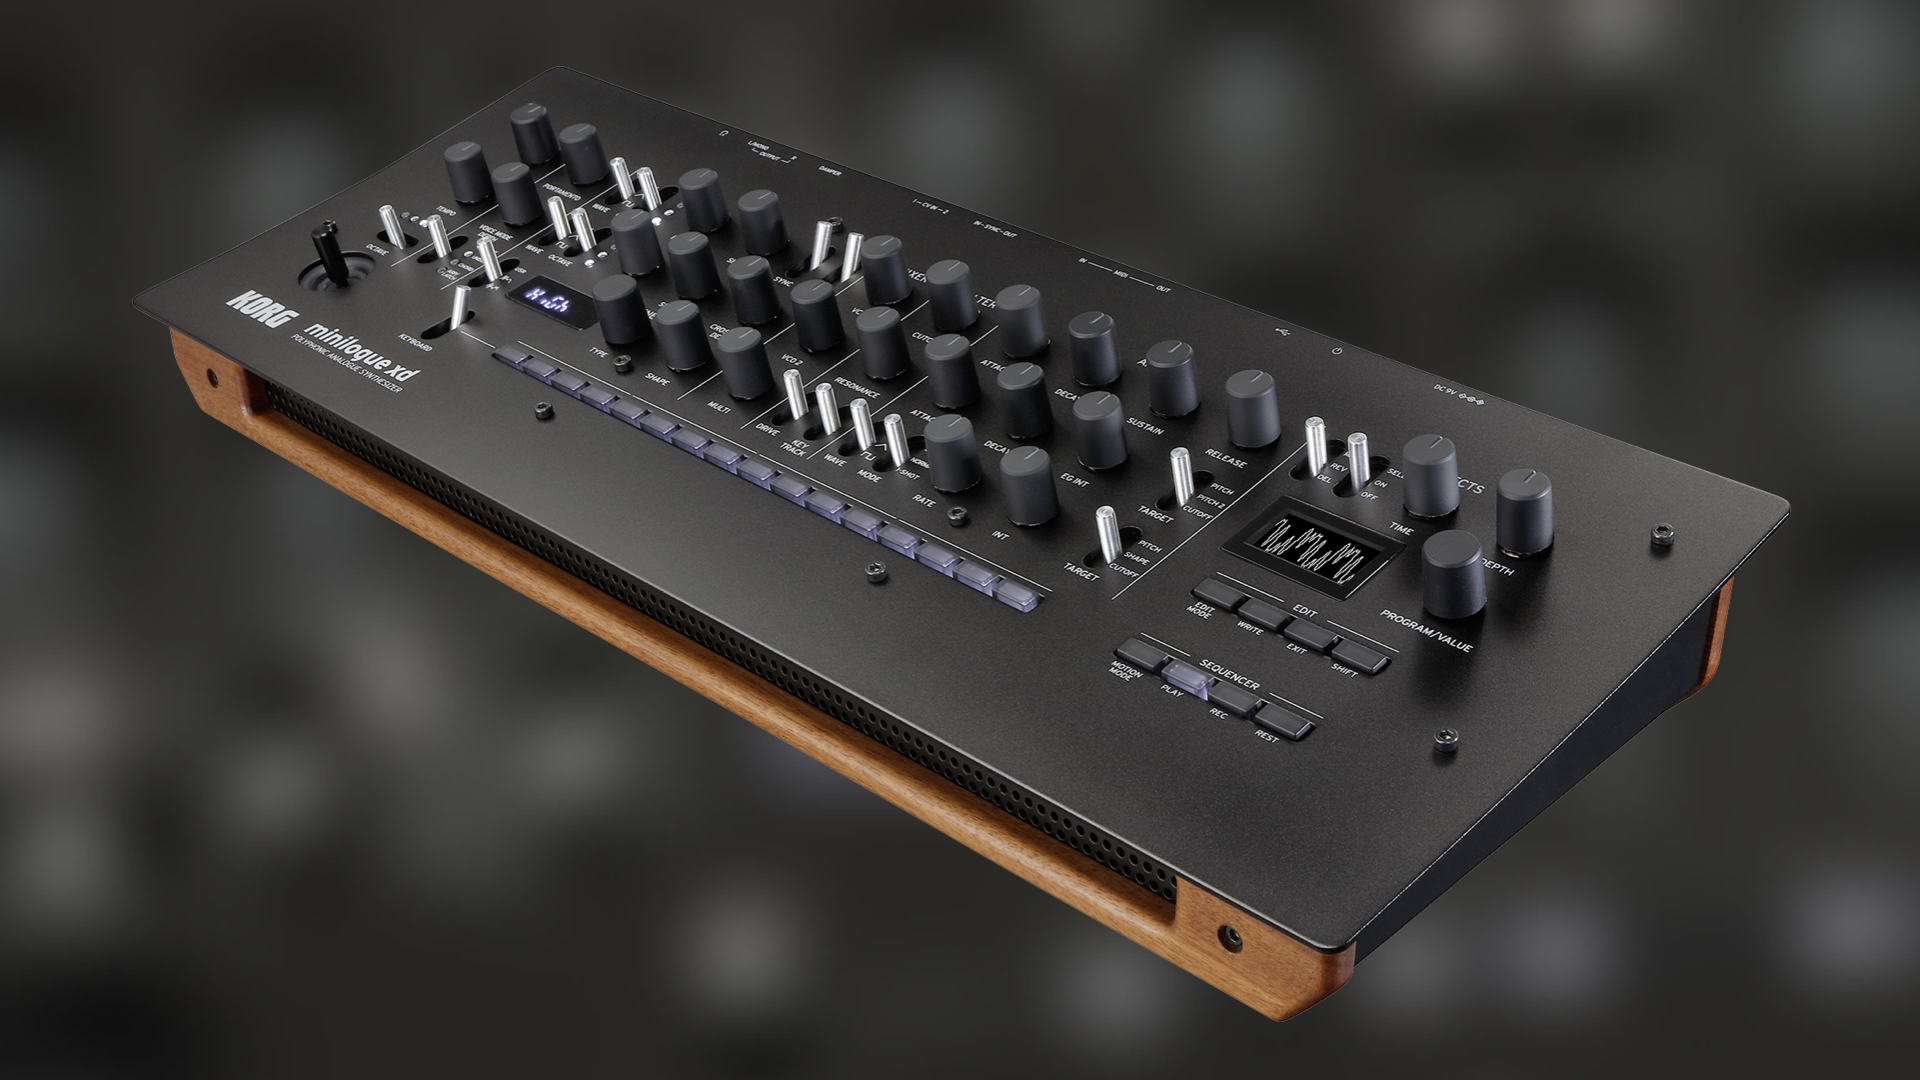 Korg Minilogue xd Synthesizer Module Version Has Dropped In Price